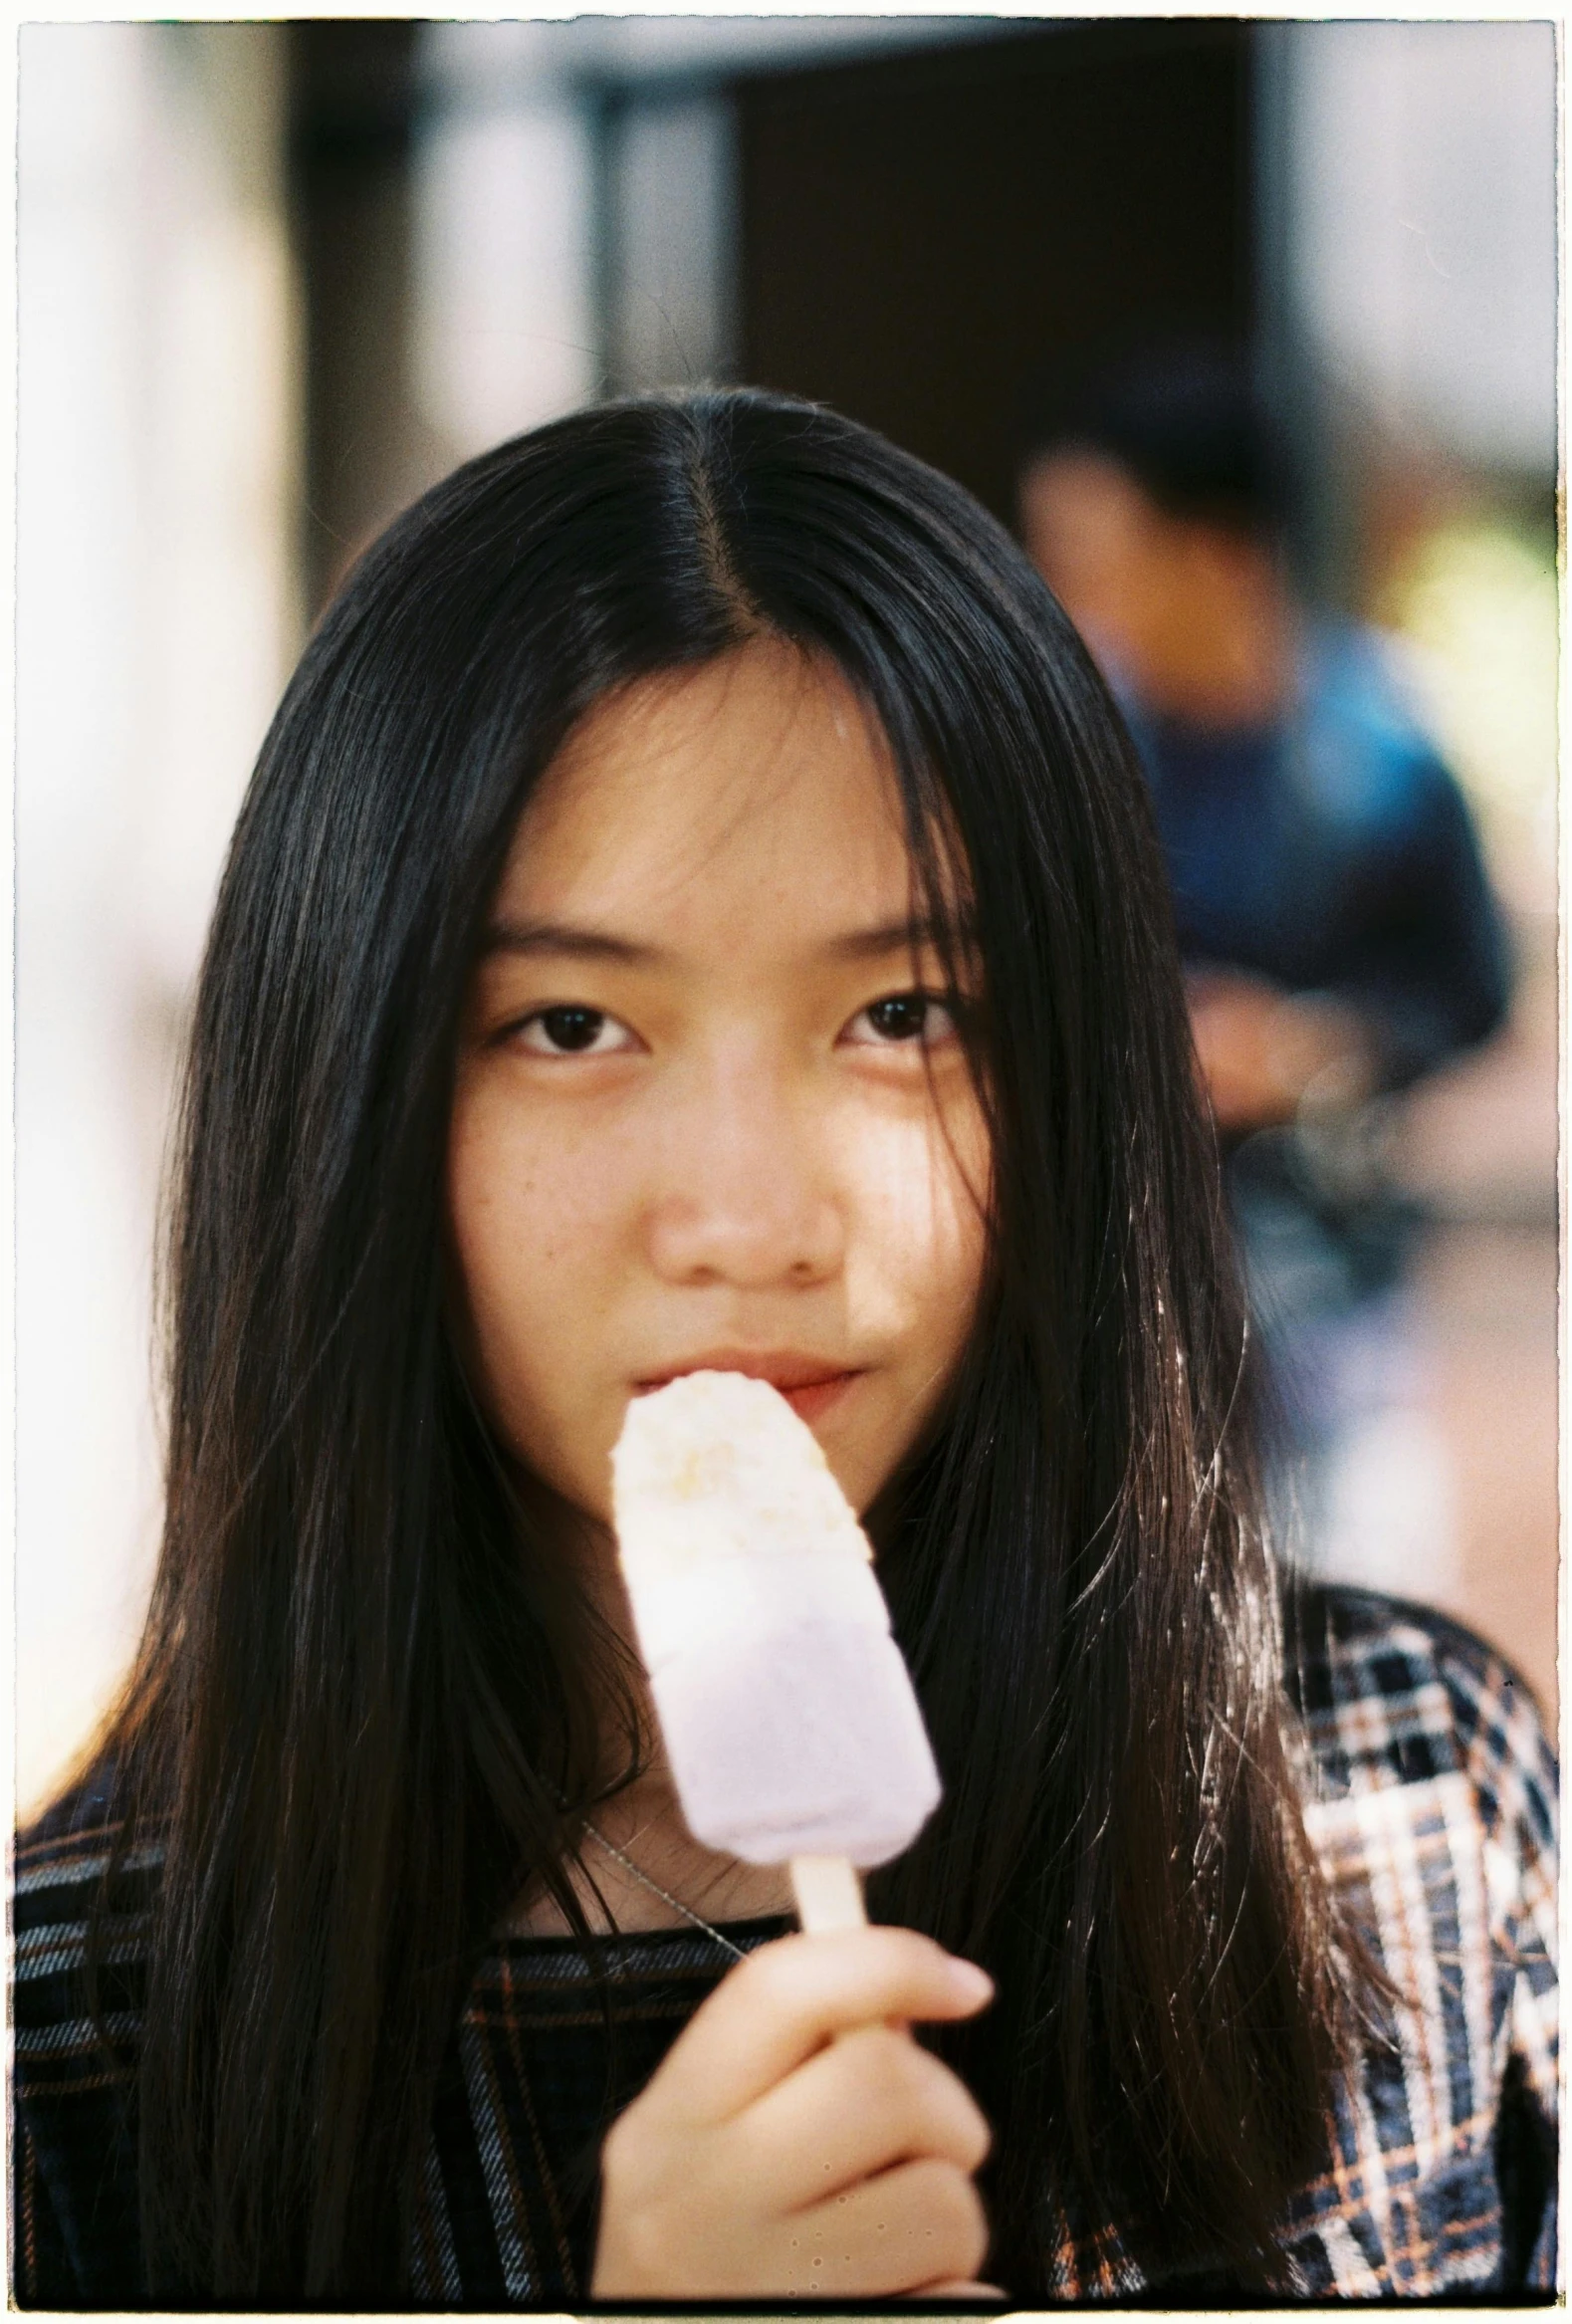 a close up of a person holding a popsicle, by Tan Ting-pho, young woman with long dark hair, lovingly looking at camera, song nan li, ice cream on the side